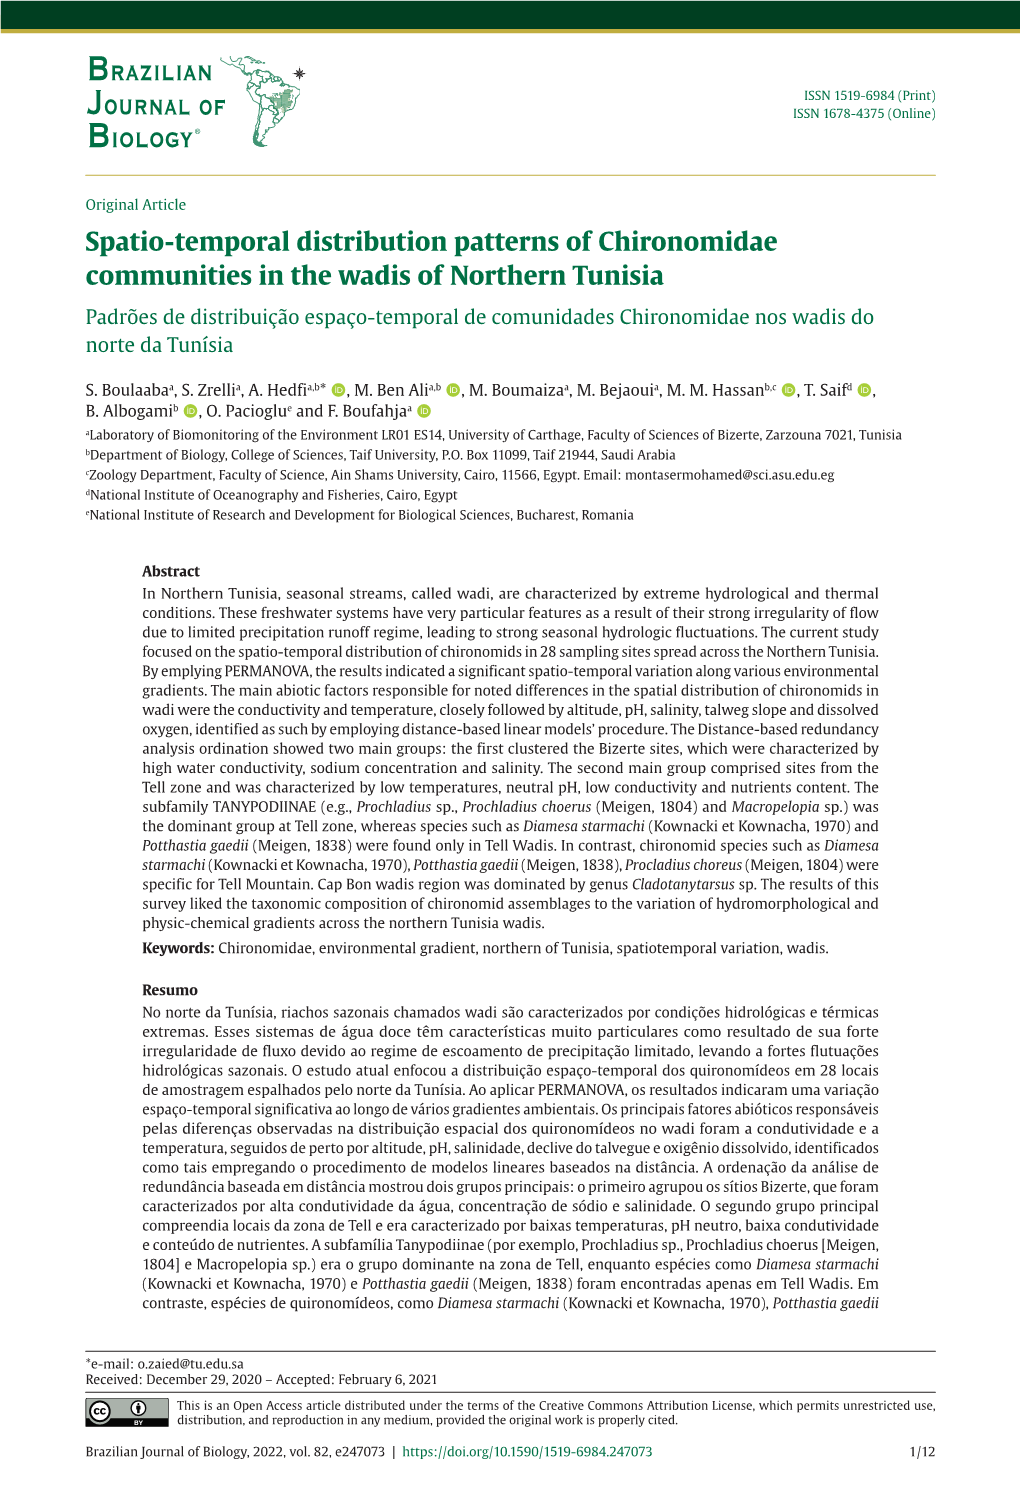 Spatio-Temporal Distribution Patterns of Chironomidae Communities in the Wadis of Northern Tunisia